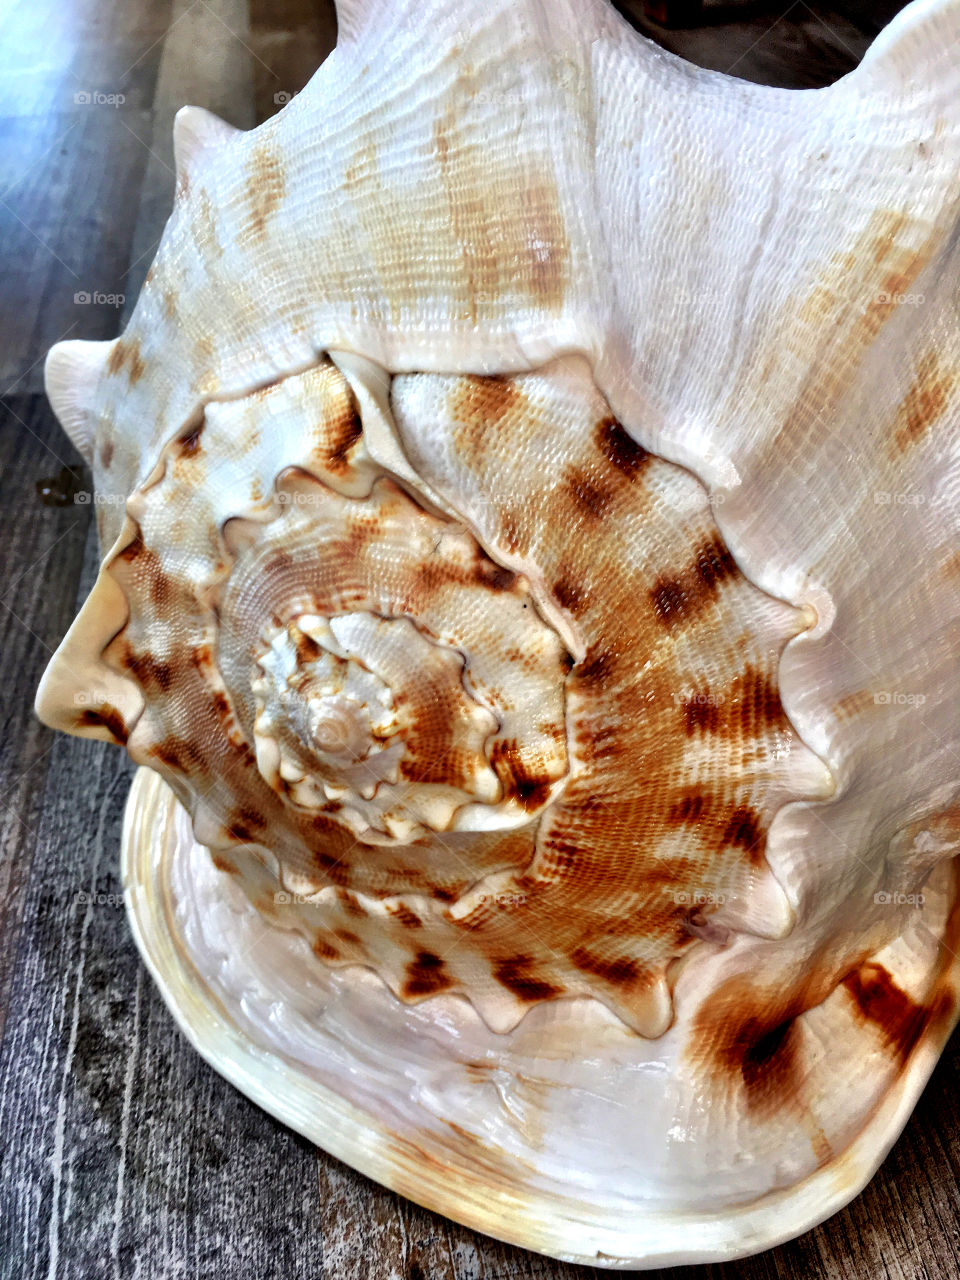 Conch shell on wood